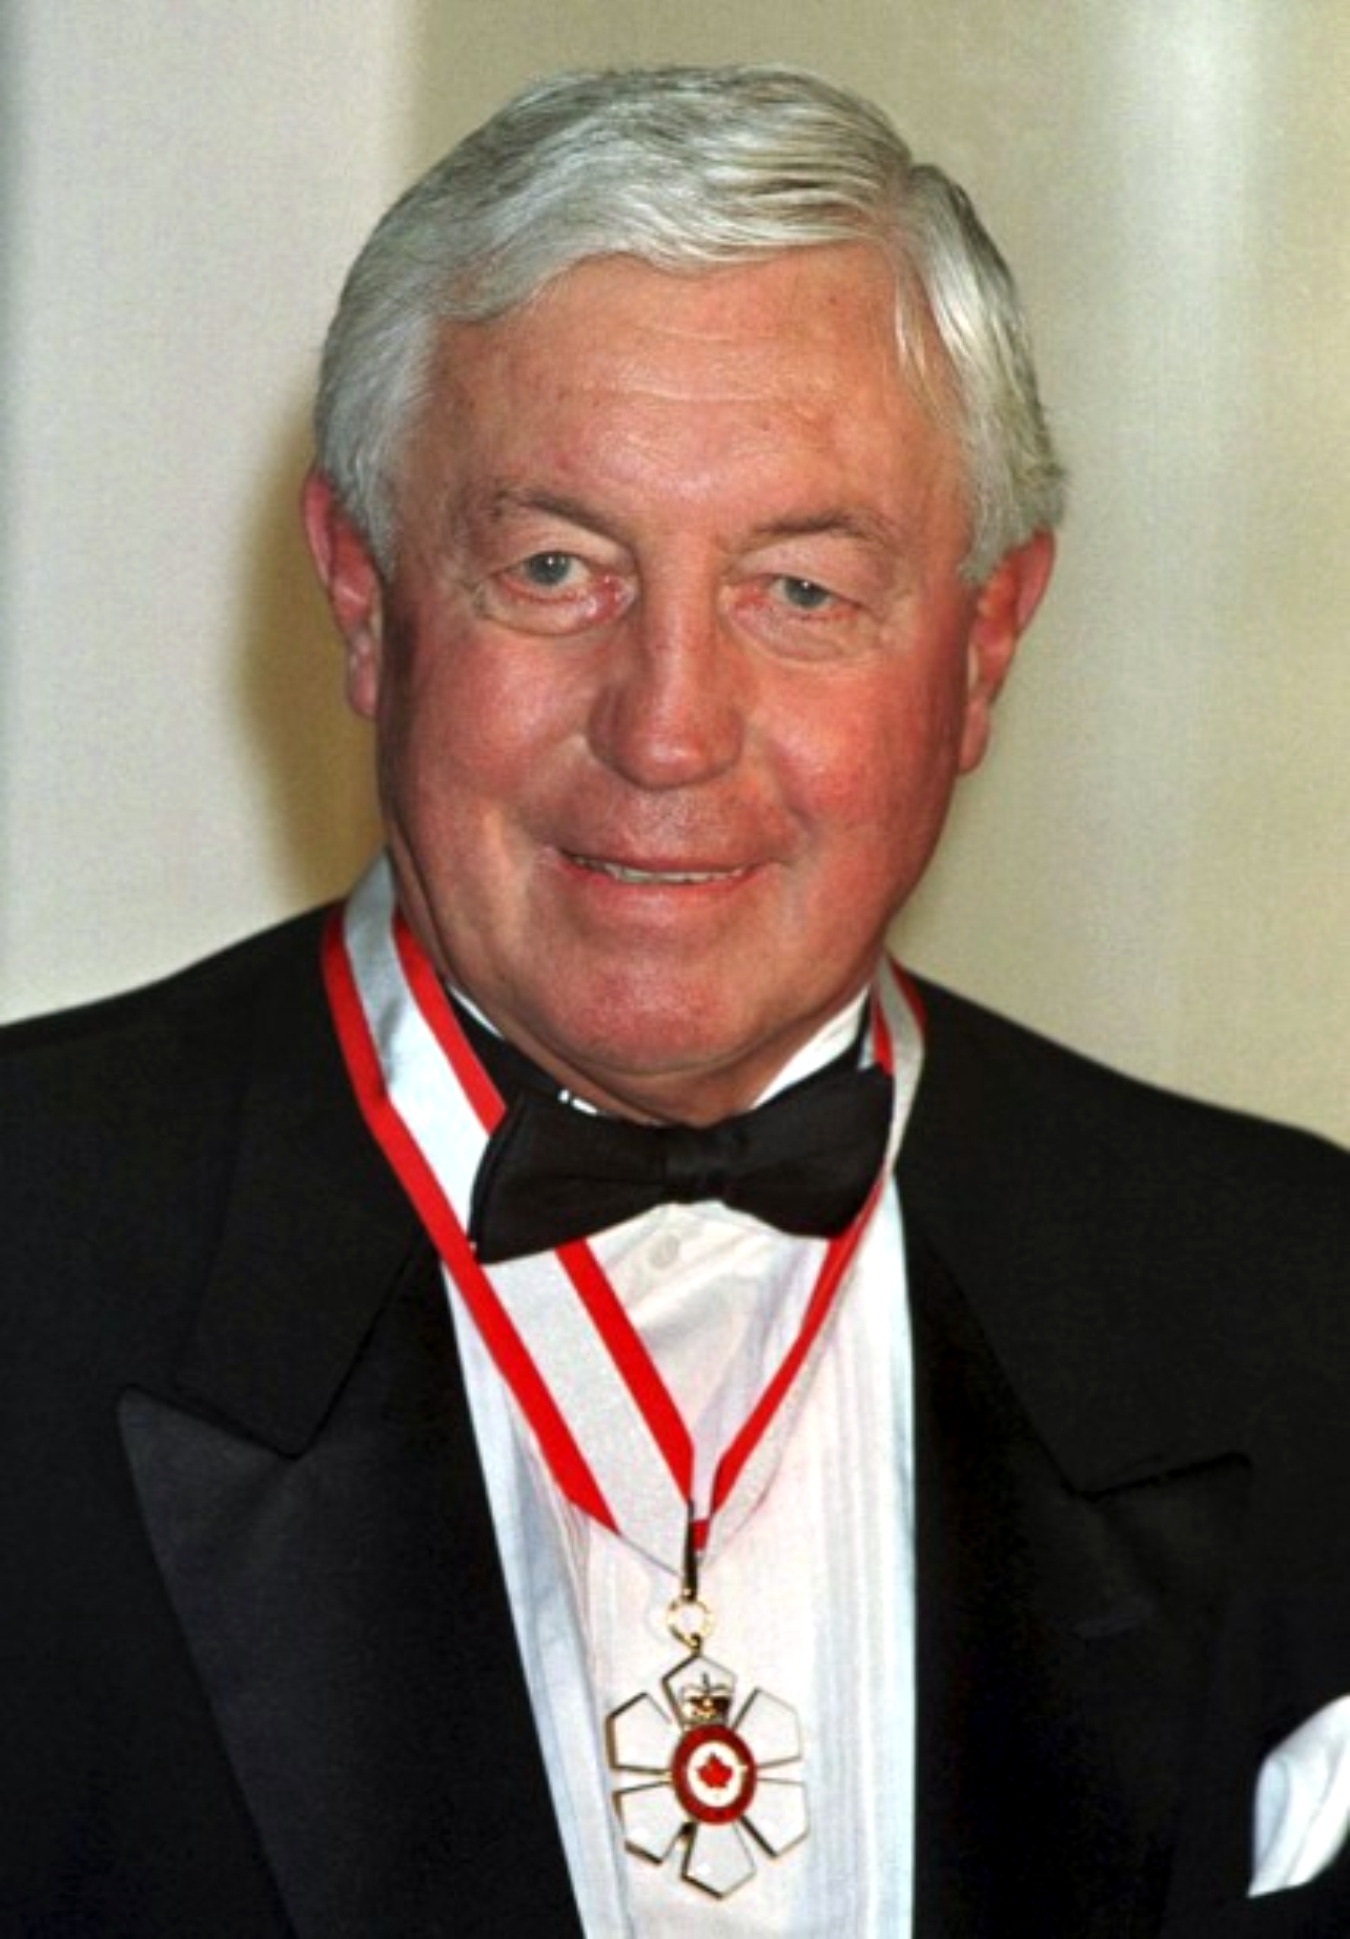 Jean Beliveau and the Order of Canada